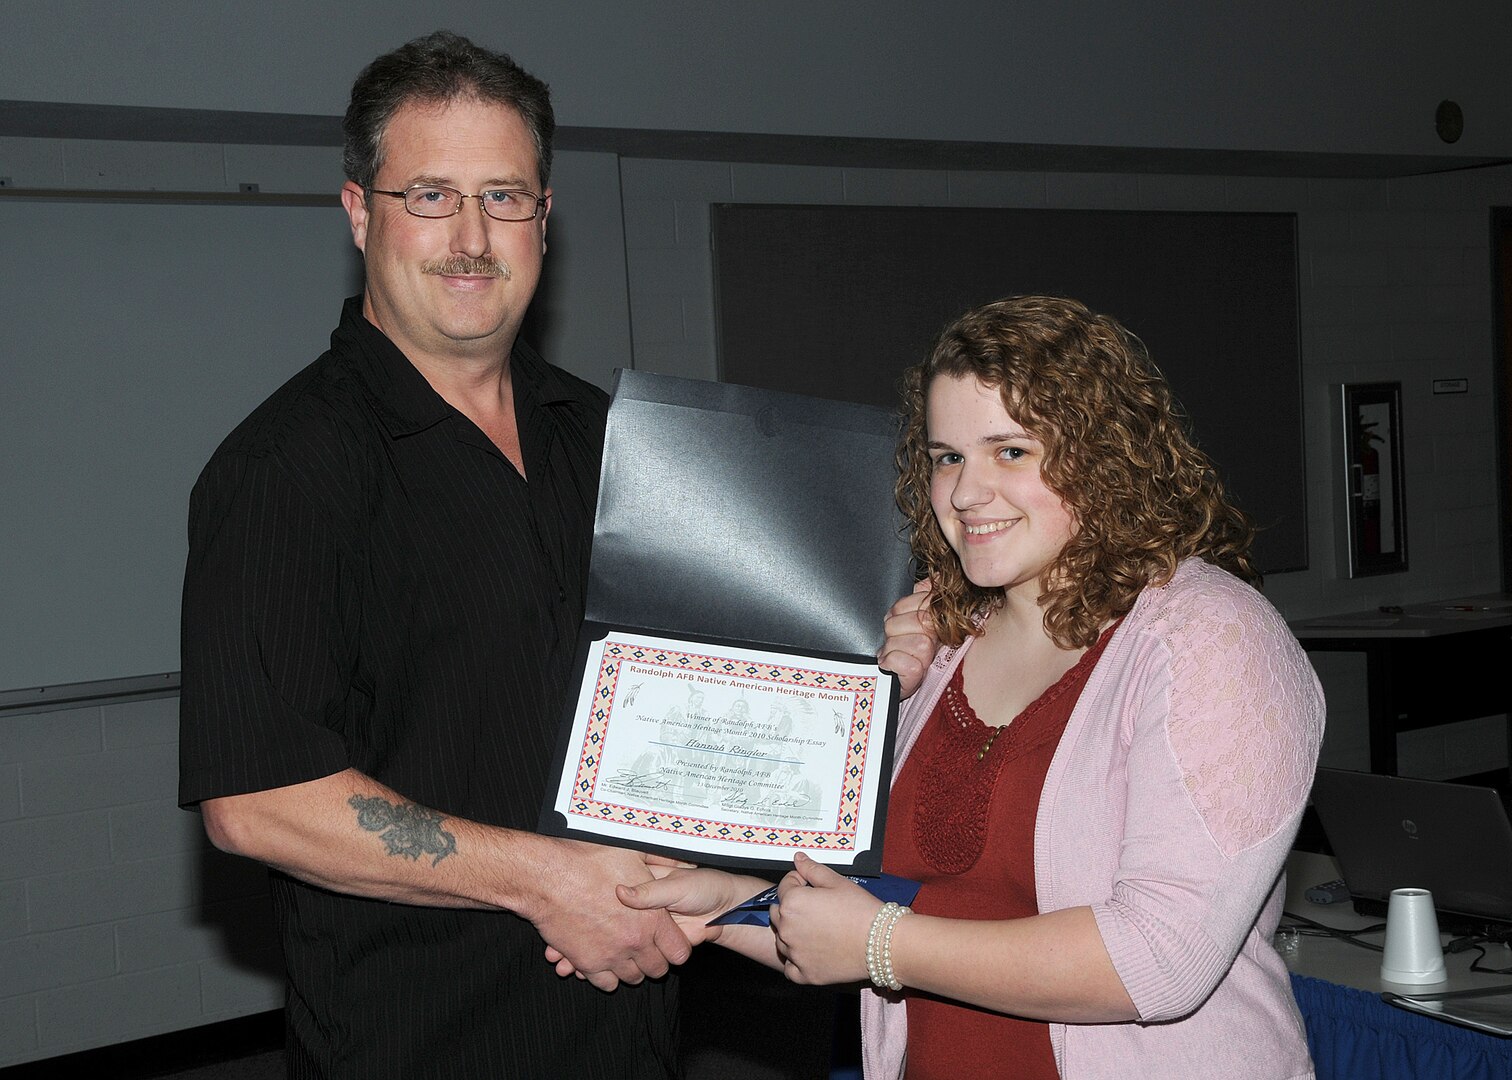 Hannah Ringler, the winner of the Native American Heritage Month 2010 scholarship, receives a certificate and check from Edward J. Blauvelt, a Training Specialist-Registrar/Security Manager with 12 Operation Support Squadron. Ringler, a senior at Randolph High School, wrote an essay on the importance of Native American Heritage in a military institution. She is the daughter of Senior Master Sgt Gordon and Lisa Ringler. He is with the 313 FLTF at Kelly Air Force Base.
(U.S. Air Force photo/David Terry)